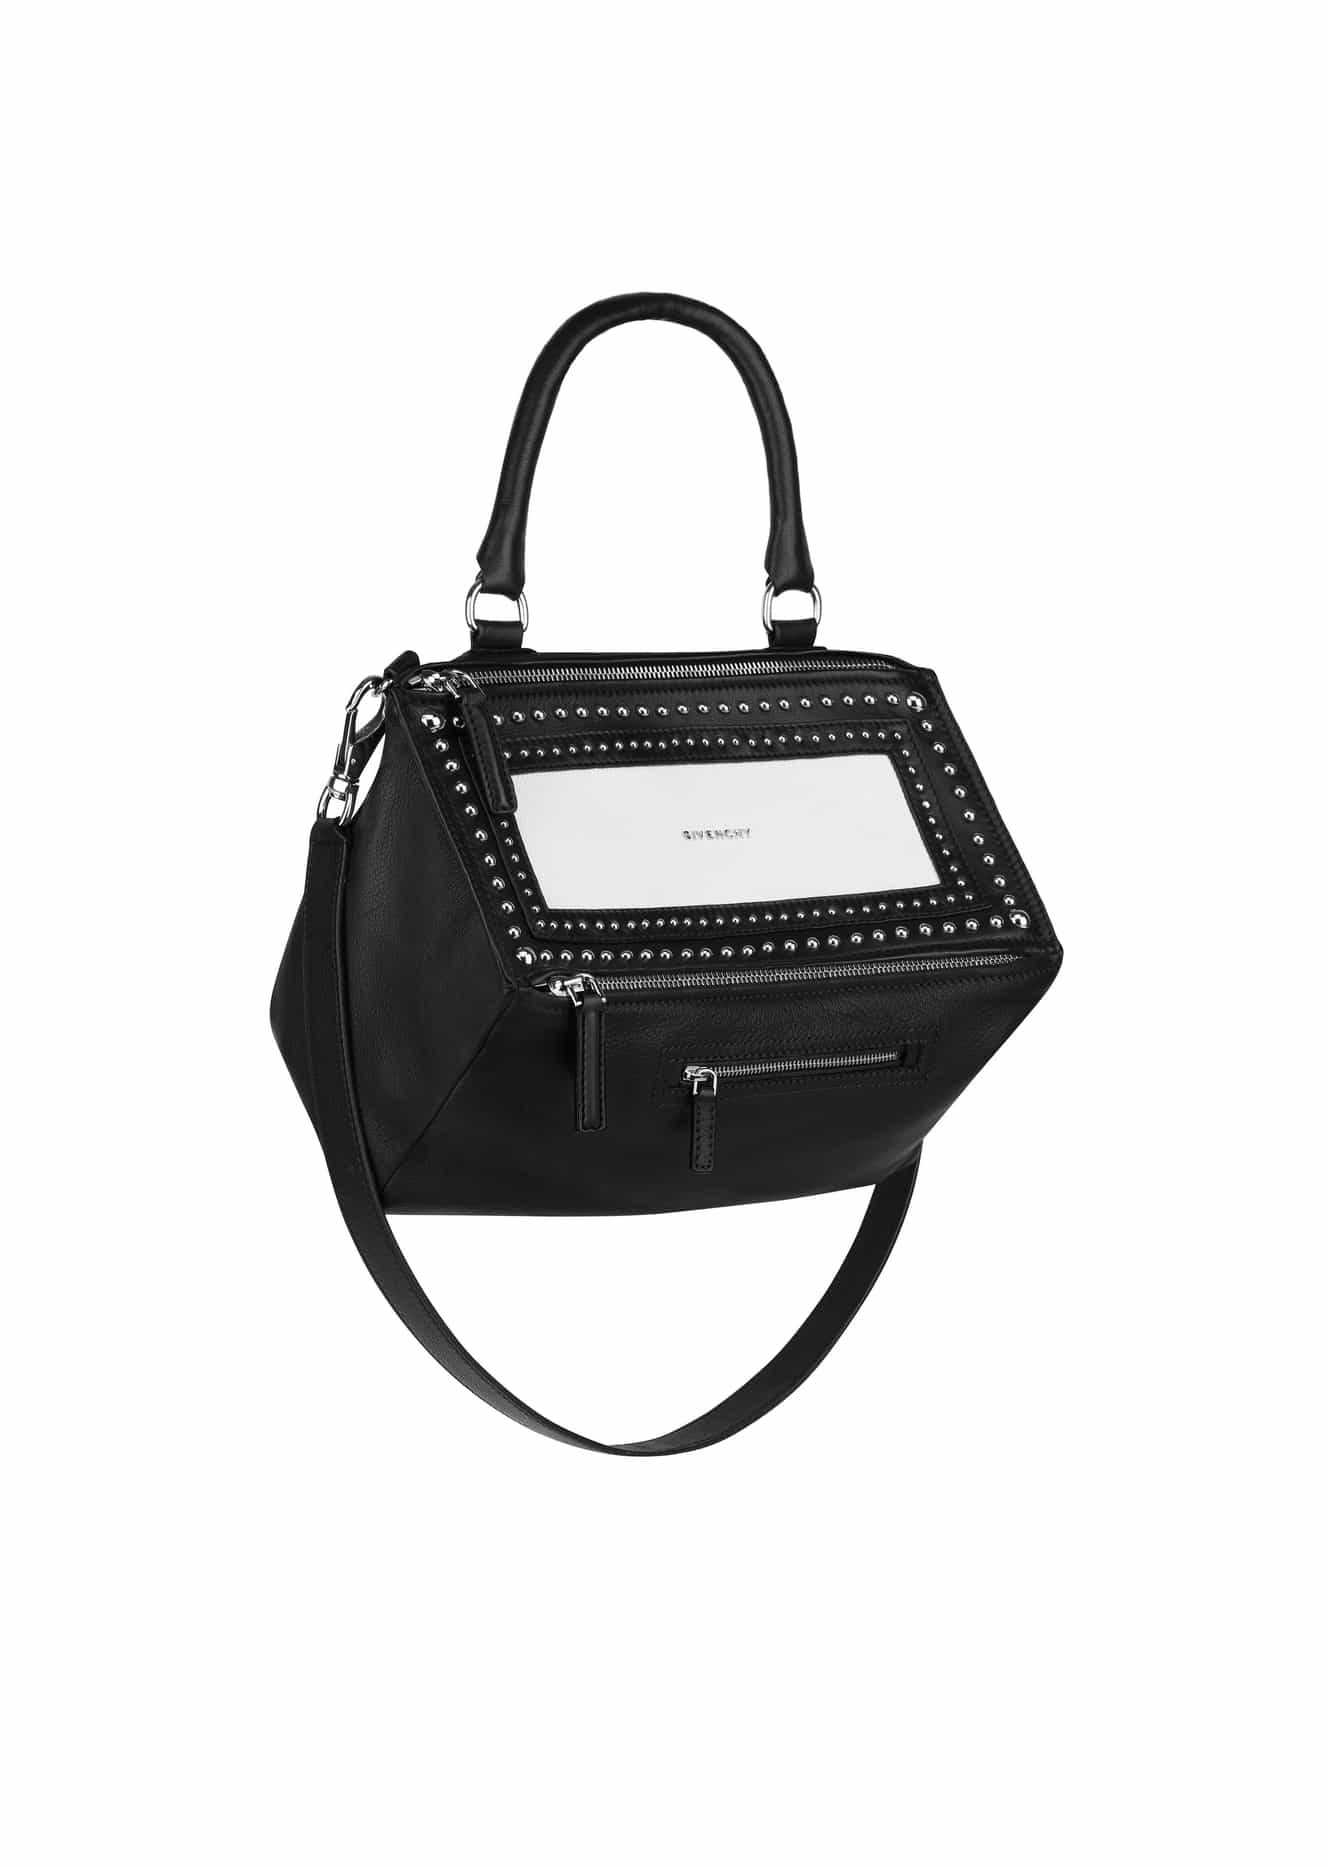 Givenchy Pandora Bag Reference Guide - Spotted Fashion